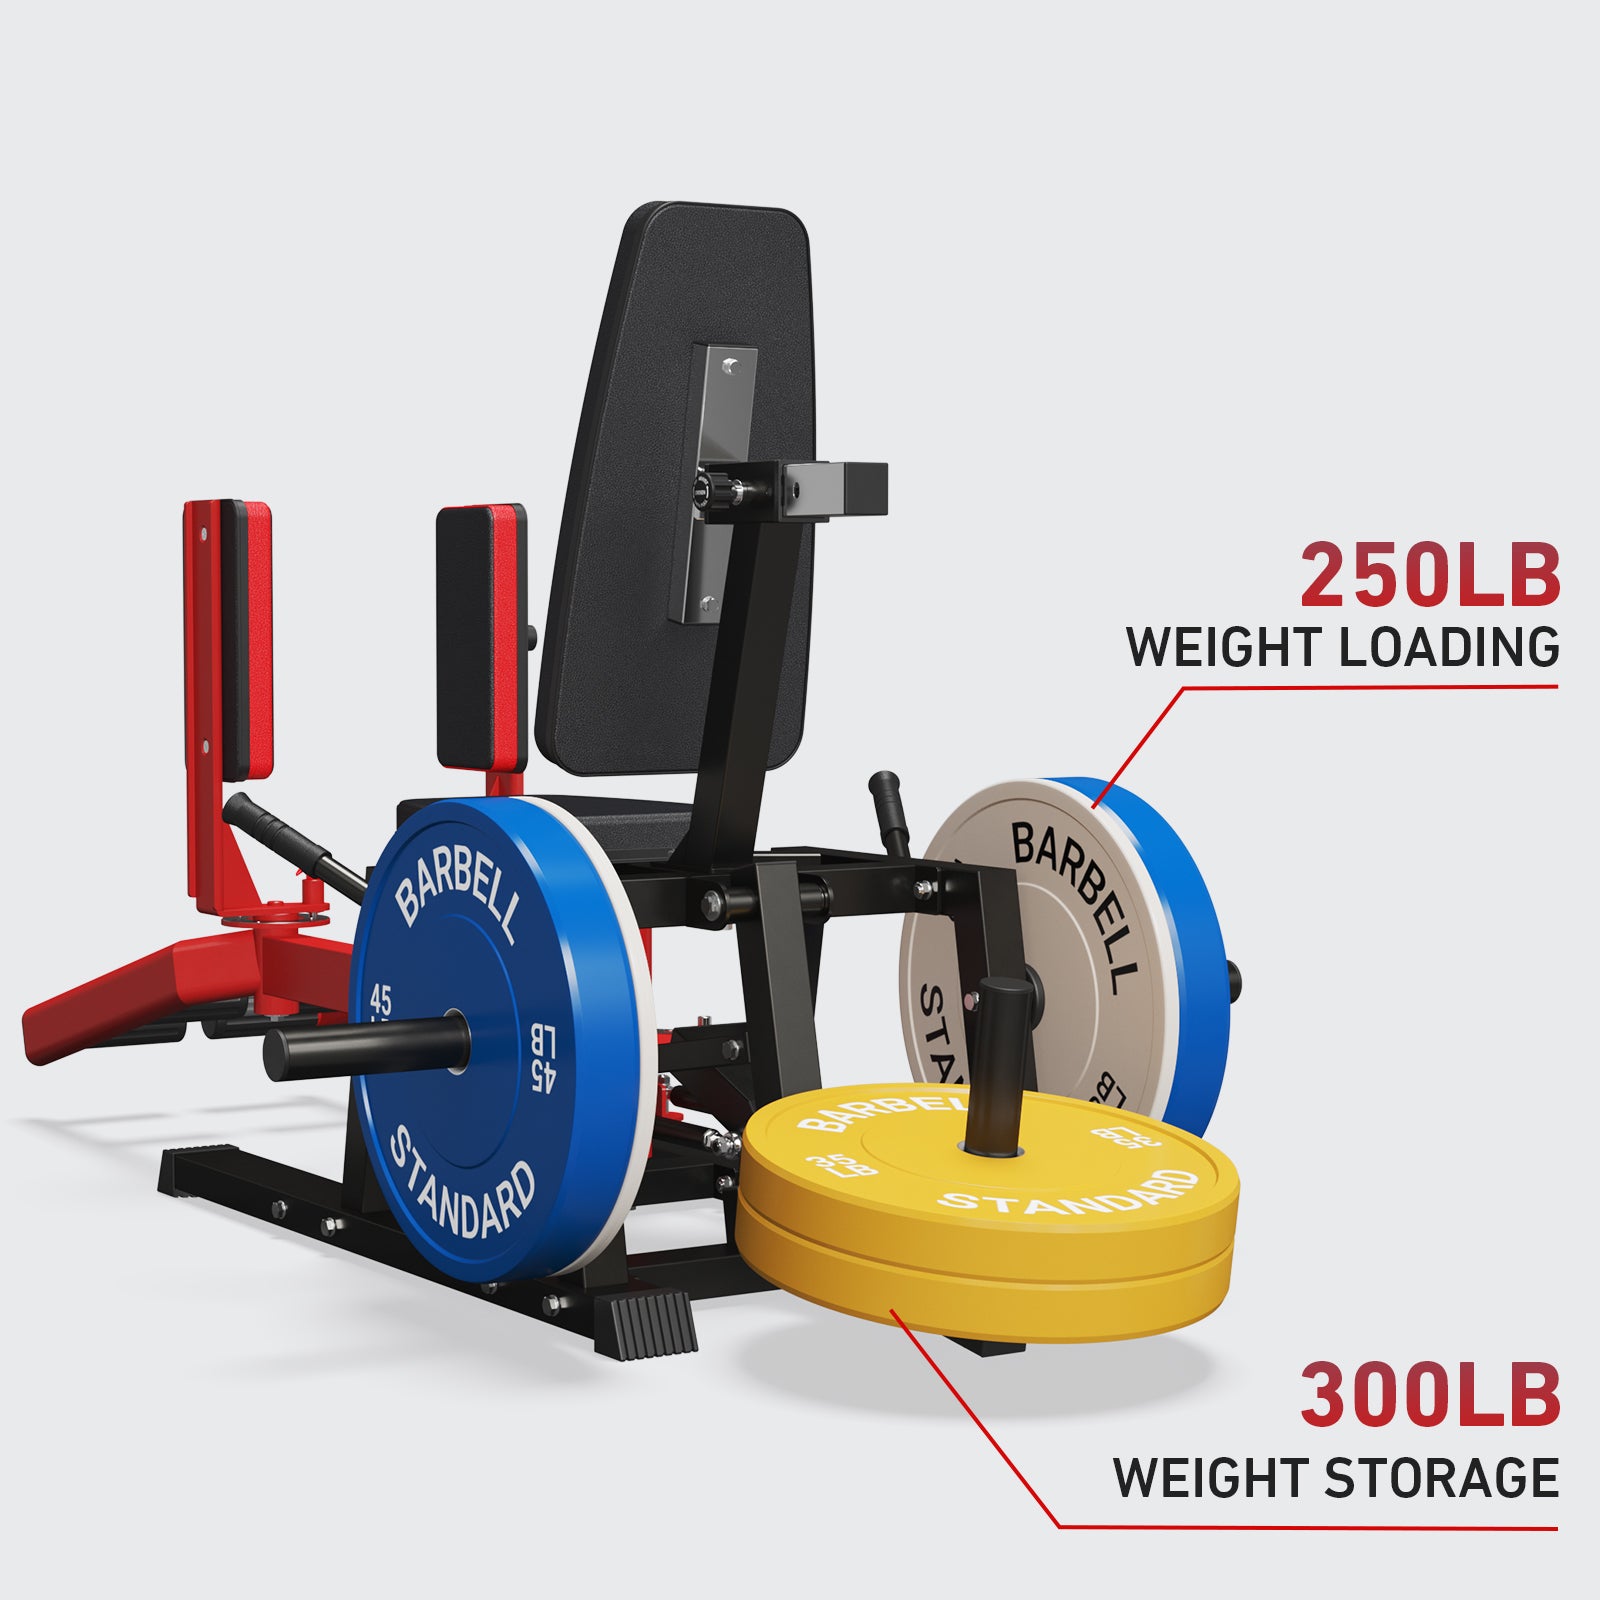 Body-Solid Hip Abduction Abductor Machine (S2IOT) – WorkoutHealthy LLC